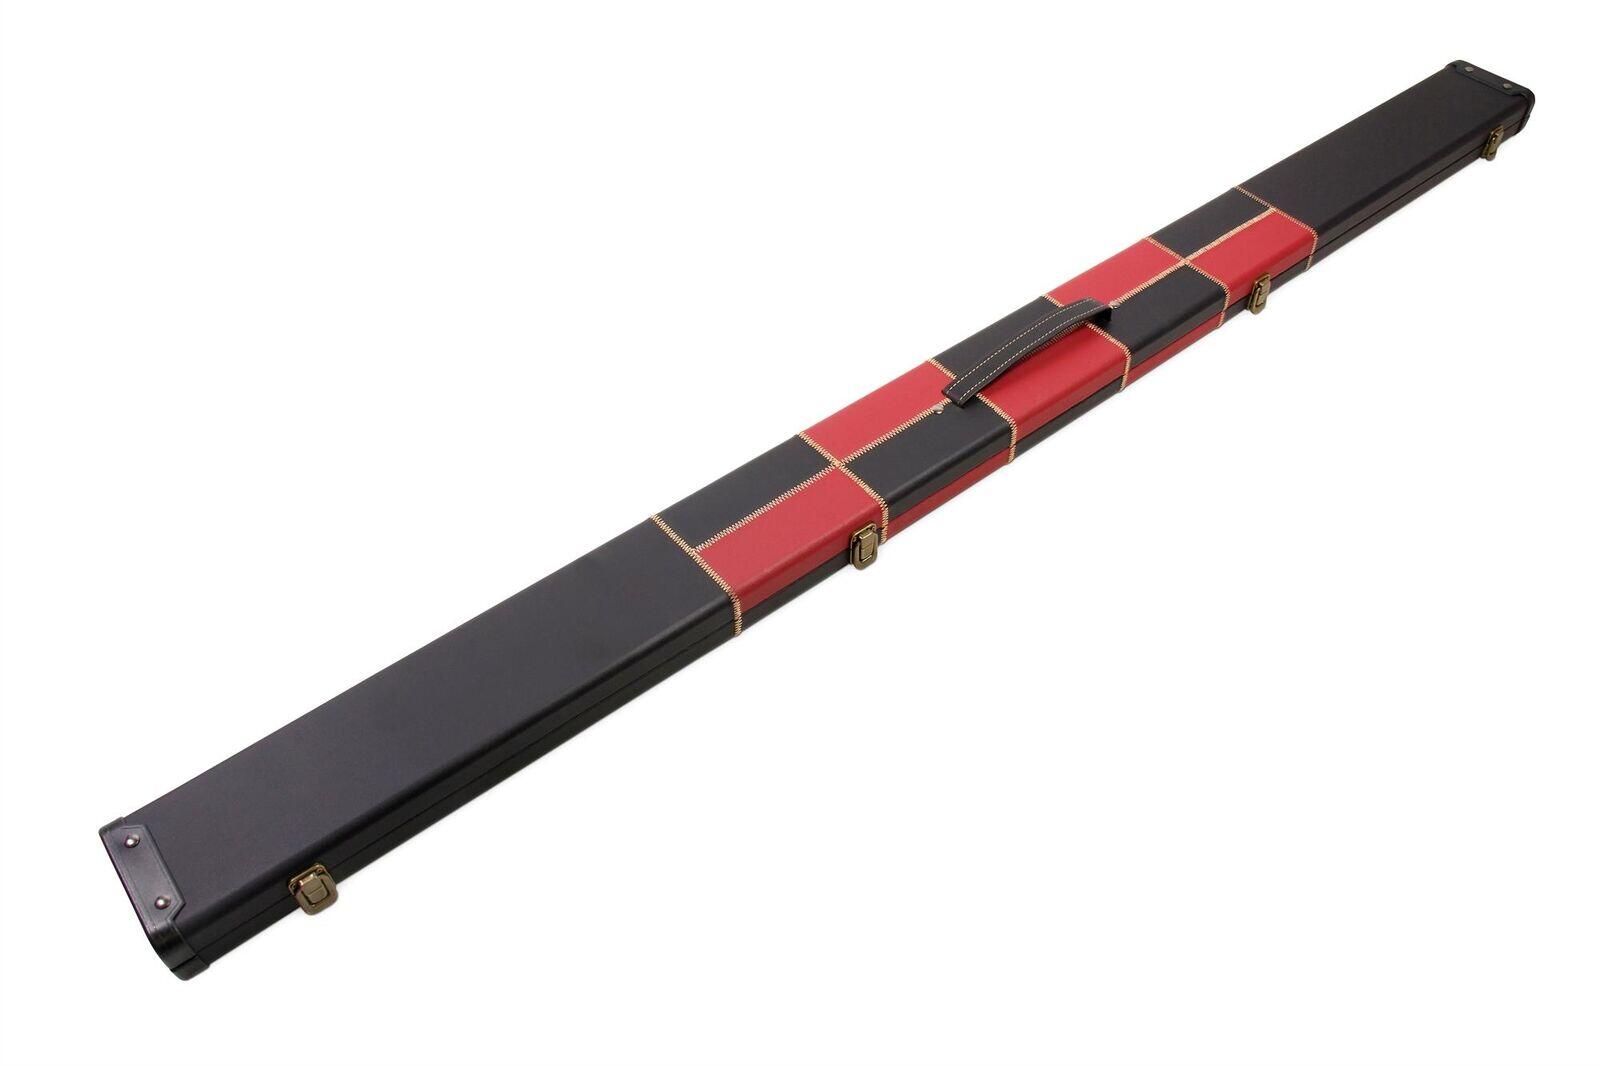 Deluxe 1 Piece WIDE BURGUNDY CHEQUERED Snooker Pool Cue Case - Holds 3 Cues 5/7